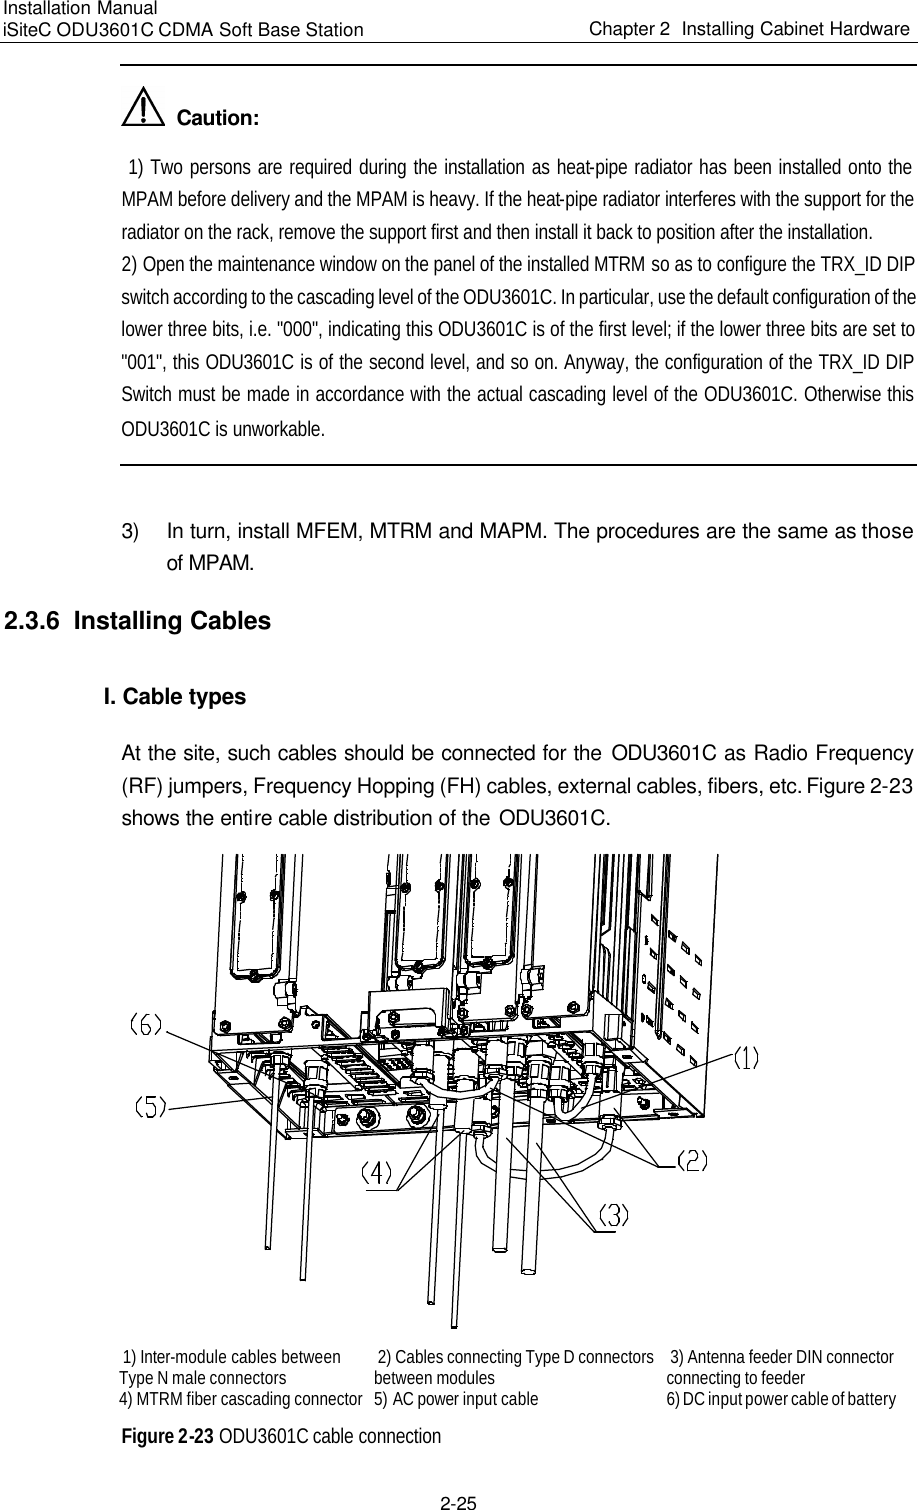 Installation Manual   iSiteC ODU3601C CDMA Soft Base Station Chapter 2  Installing Cabinet Hardware  2-25   Caution:  1) Two persons are required during the installation as heat-pipe radiator has been installed onto the MPAM before delivery and the MPAM is heavy. If the heat-pipe radiator interferes with the support for the radiator on the rack, remove the support first and then install it back to position after the installation.  2) Open the maintenance window on the panel of the installed MTRM so as to configure the TRX_ID DIP switch according to the cascading level of the ODU3601C. In particular, use the default configuration of the lower three bits, i.e. &quot;000&quot;, indicating this ODU3601C is of the first level; if the lower three bits are set to &quot;001&quot;, this ODU3601C is of the second level, and so on. Anyway, the configuration of the TRX_ID DIP Switch must be made in accordance with the actual cascading level of the ODU3601C. Otherwise this ODU3601C is unworkable.  3) In turn, install MFEM, MTRM and MAPM. The procedures are the same as those of MPAM. 2.3.6  Installing Cables I. Cable types At the site, such cables should be connected for the ODU3601C as Radio Frequency (RF) jumpers, Frequency Hopping (FH) cables, external cables, fibers, etc. Figure 2-23 shows the entire cable distribution of the ODU3601C.    1) Inter-module cables between Type N male connectors   2) Cables connecting Type D connectors between modules   3) Antenna feeder DIN connector connecting to feeder  4) MTRM fiber cascading connector 5) AC power input cable 6) DC input power cable of battery Figure 2-23 ODU3601C cable connection  